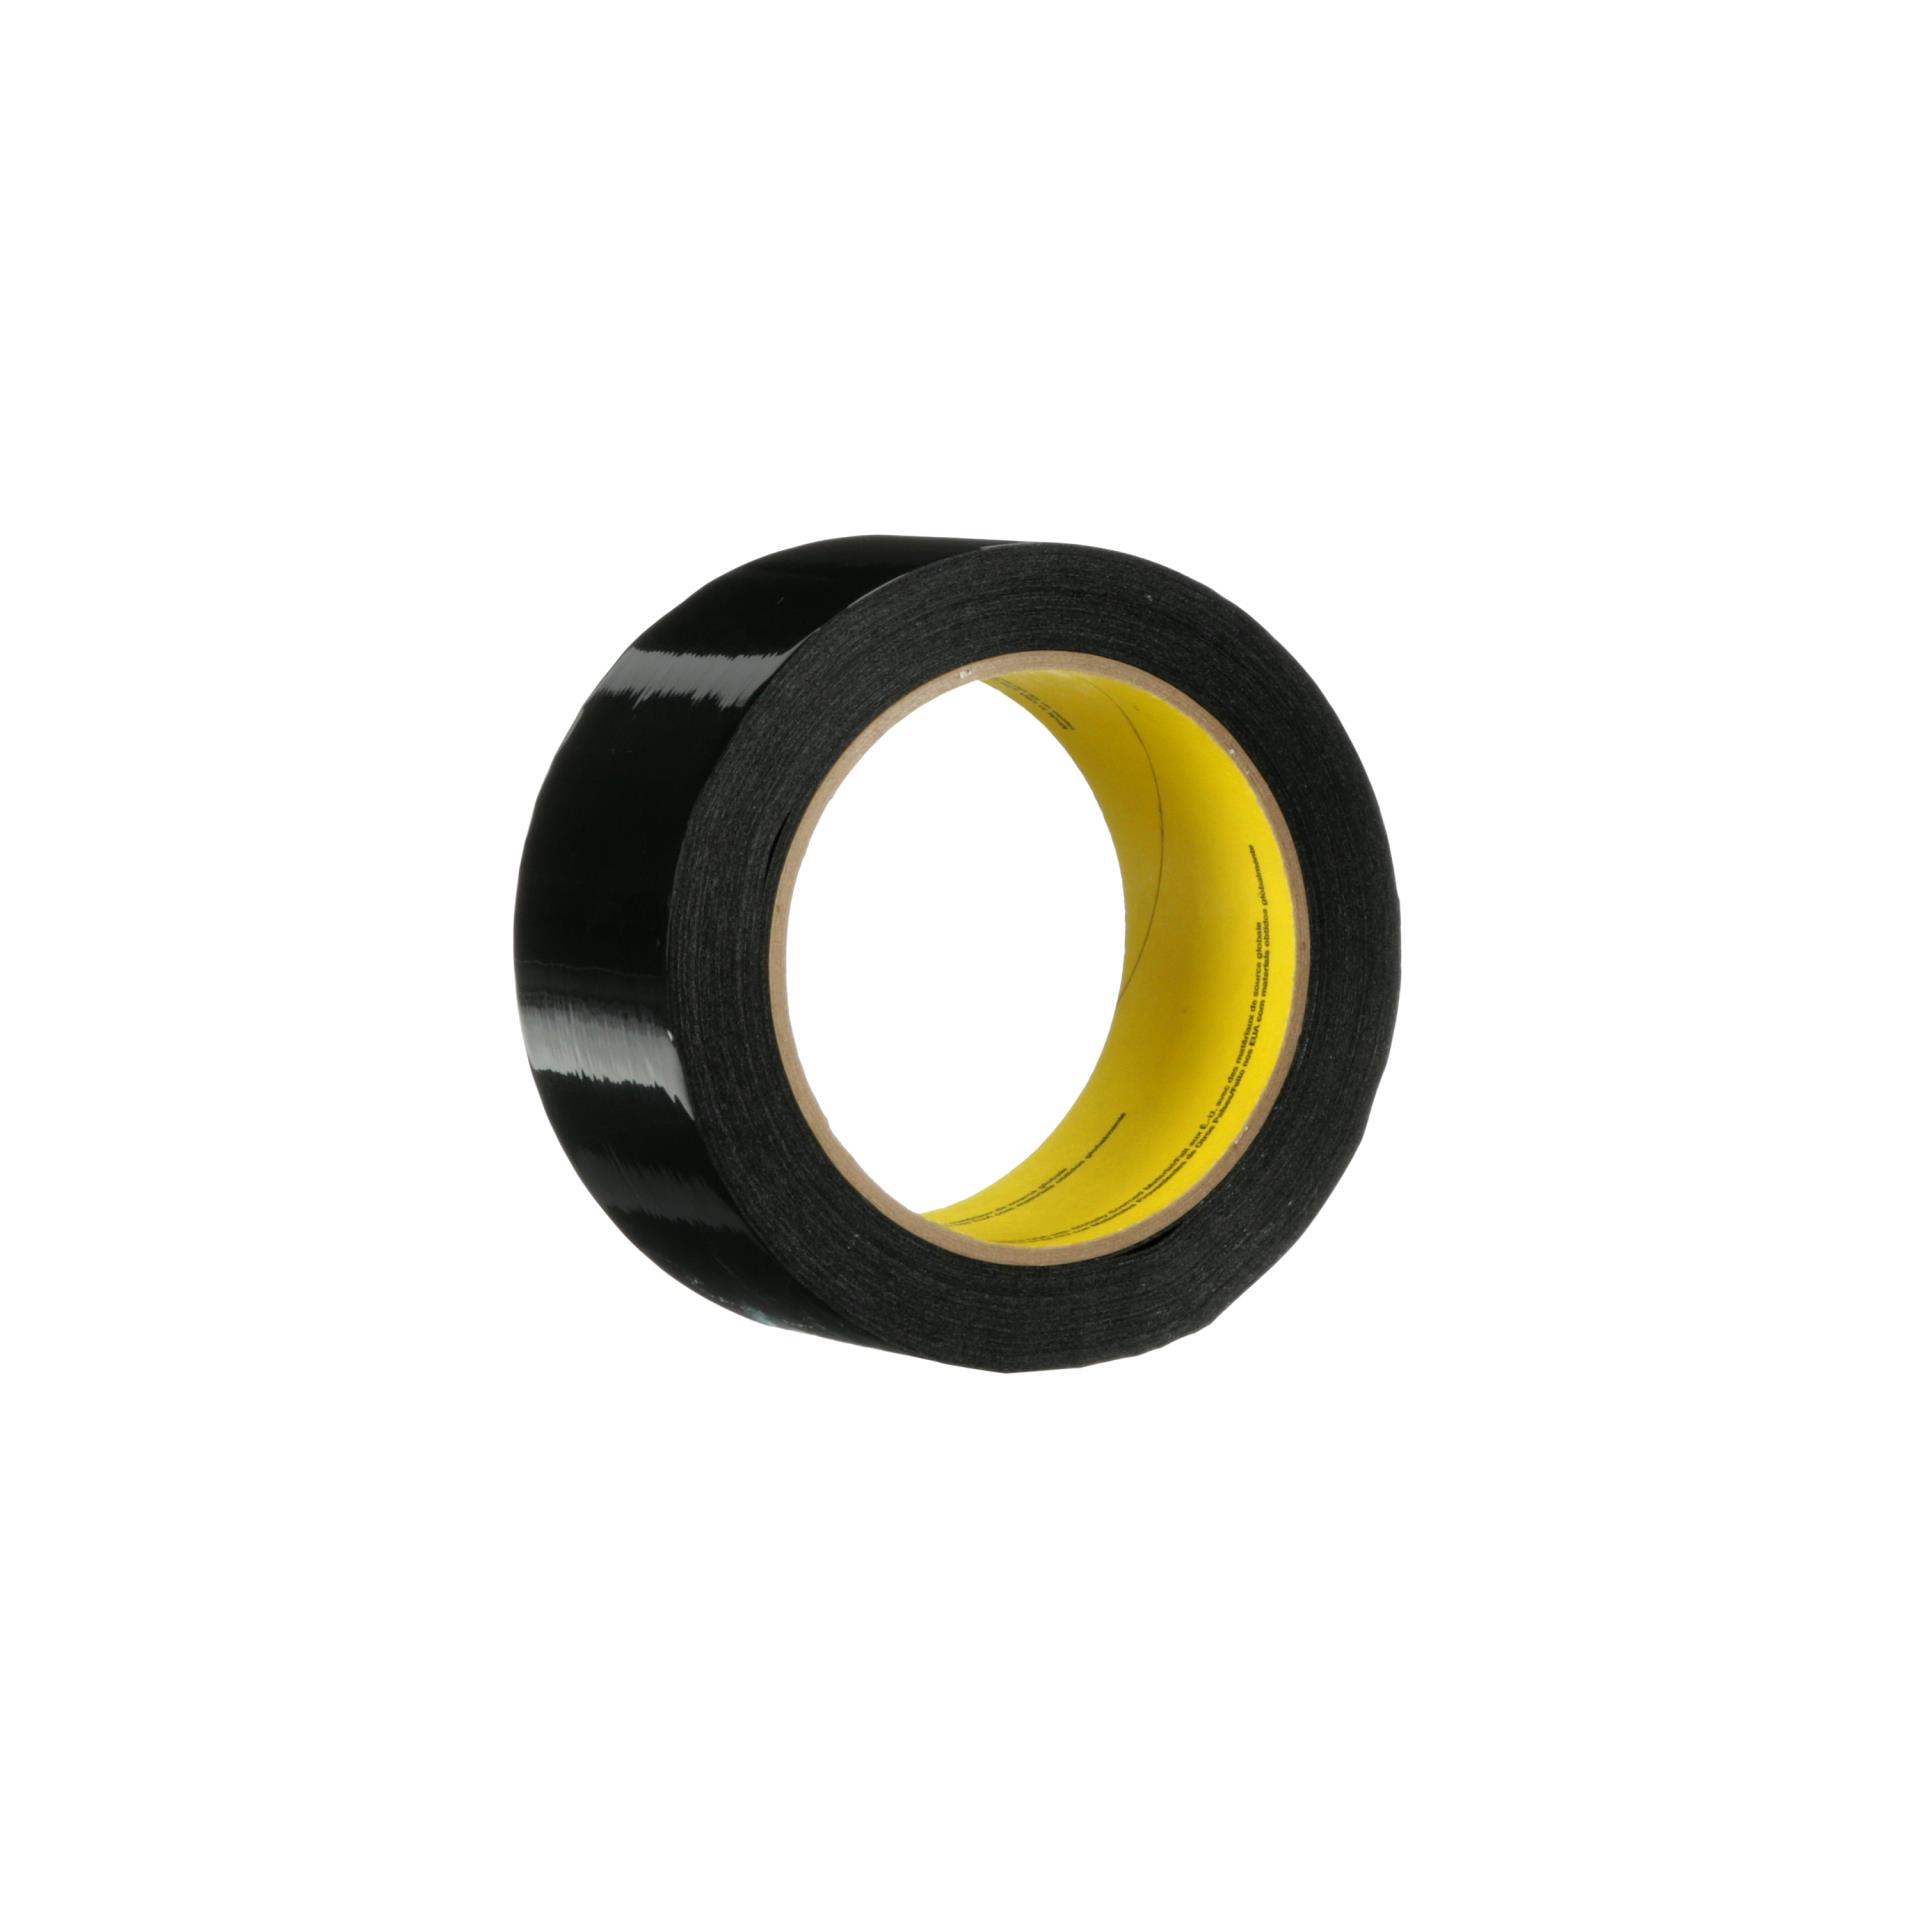 00750351150717 3M™ Venture Tape™ Line Set Tape 1507, Black, 48 mm x 55 m,  mil, 24 rolls per case Aircraft products specialty-application-tapes  9393136